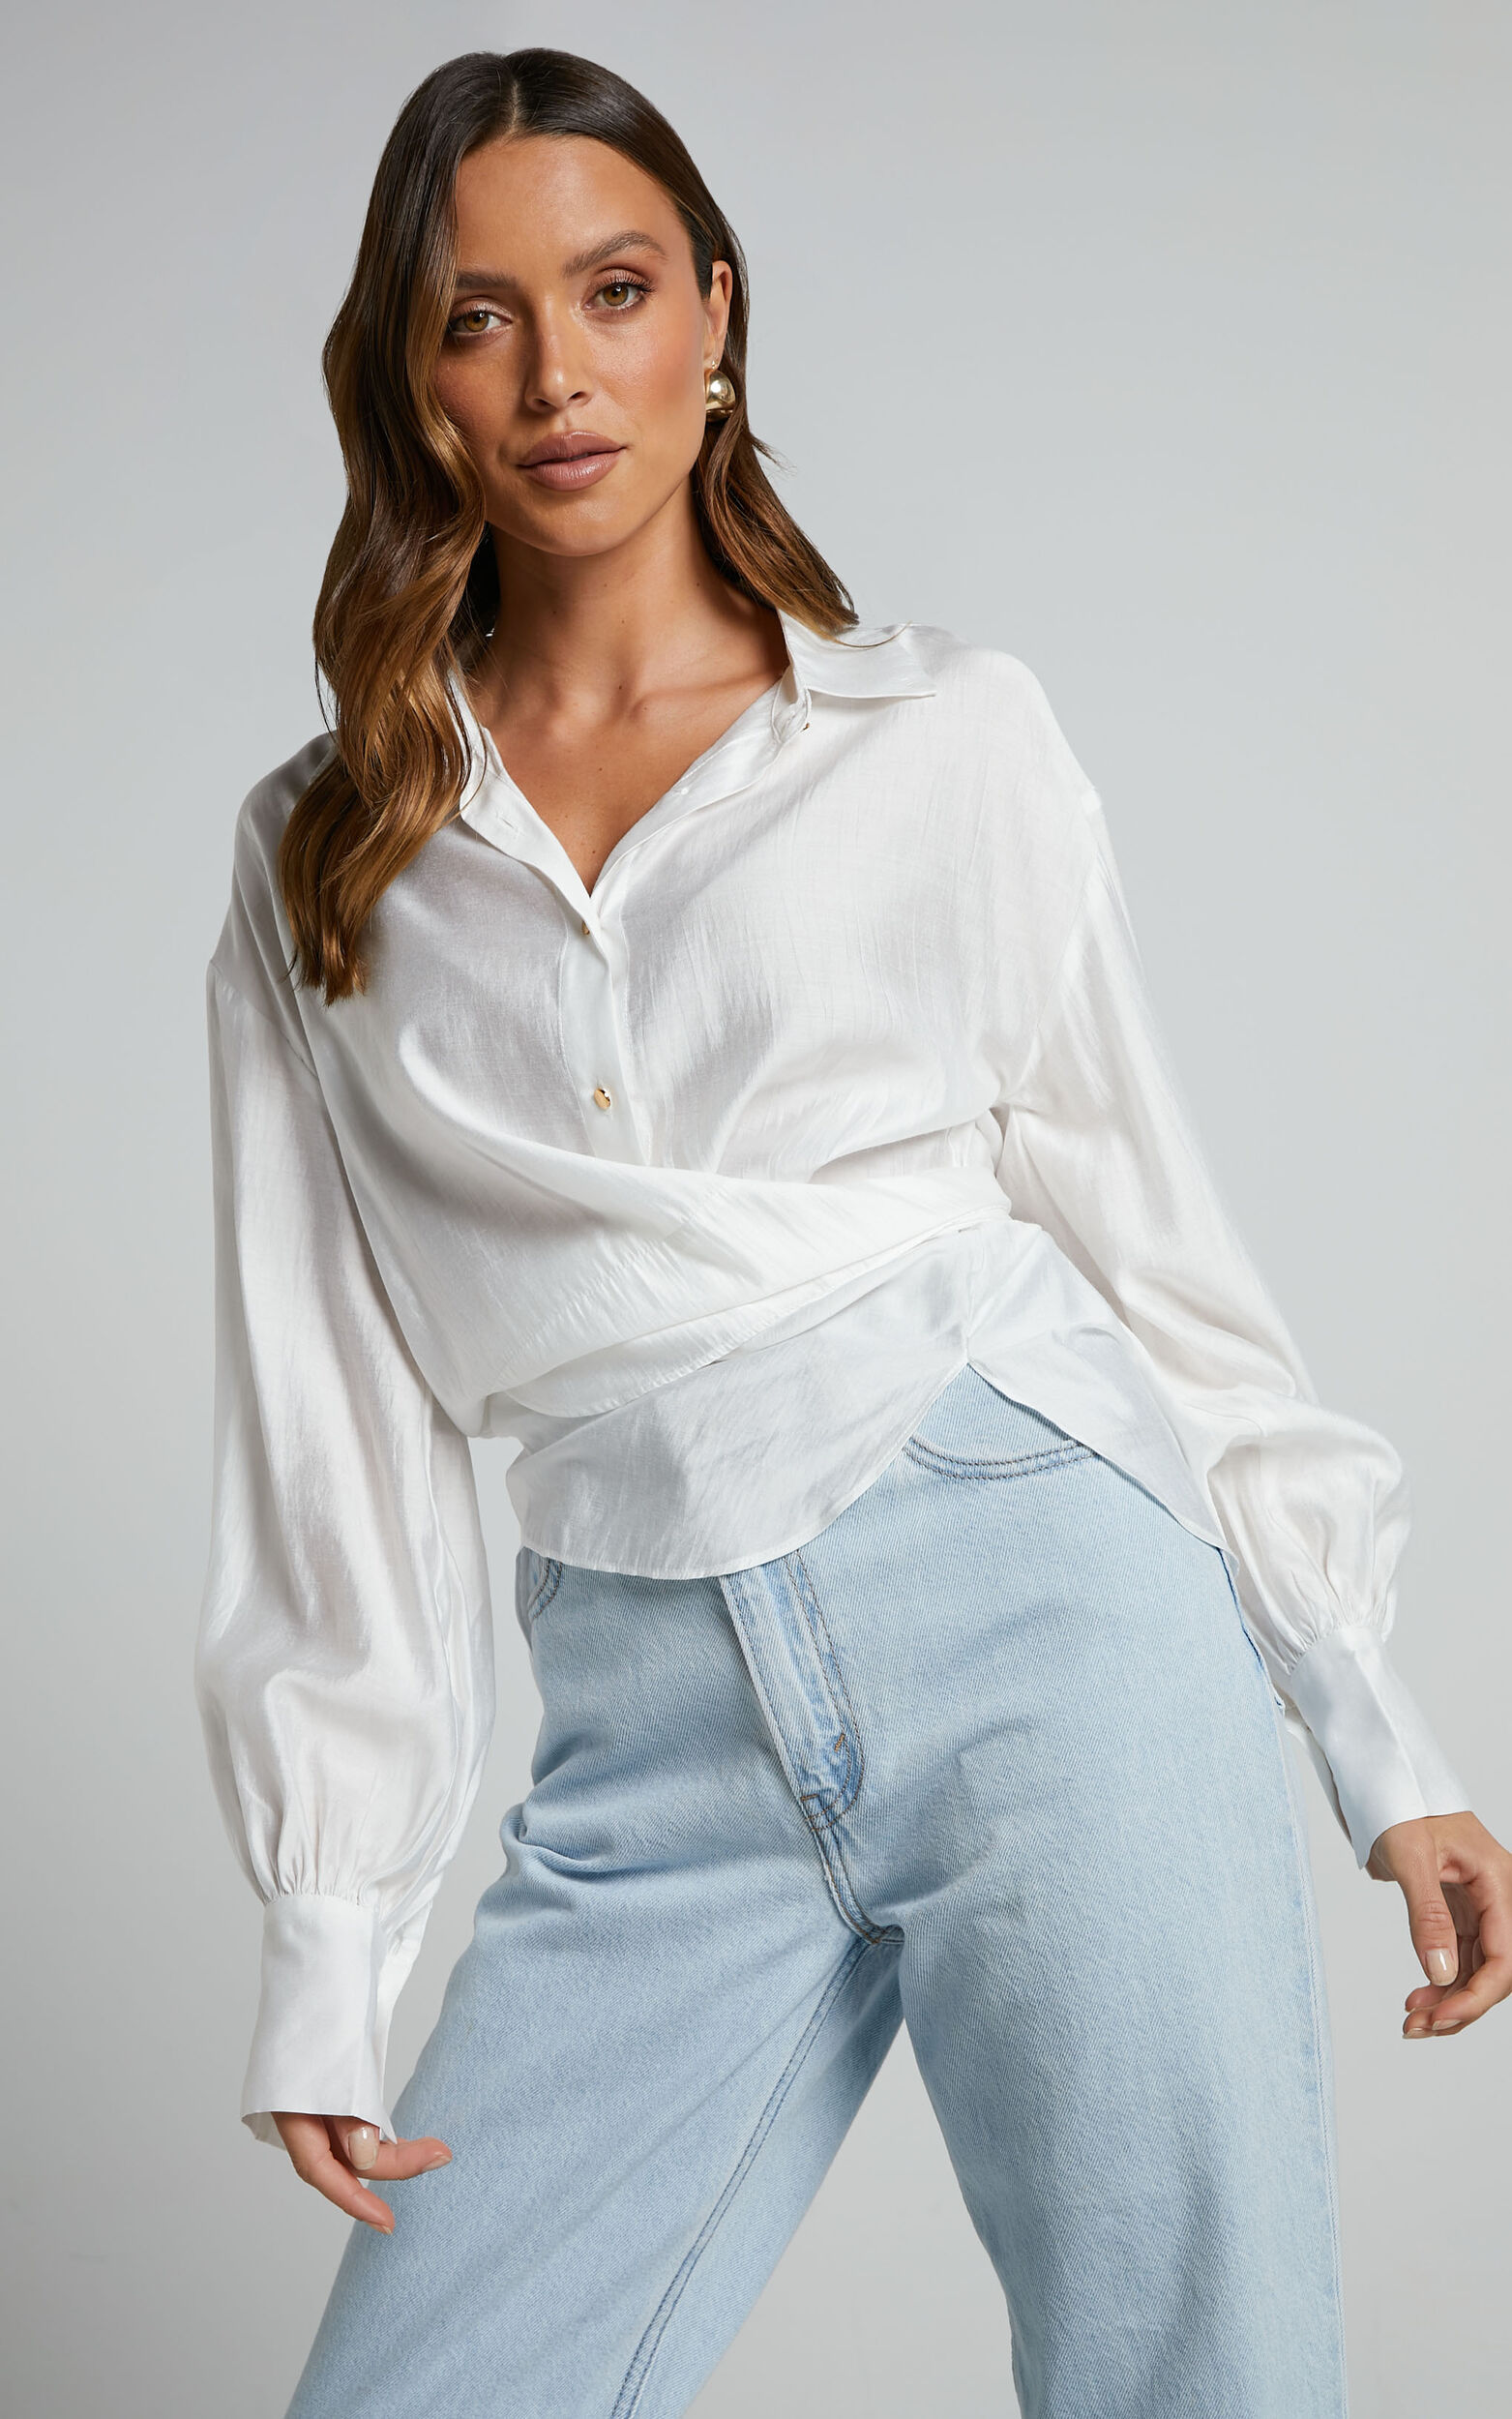 Ehrna Shirt - Twist Front Collared Long Sleeve Shirt in White - 04, WHT3